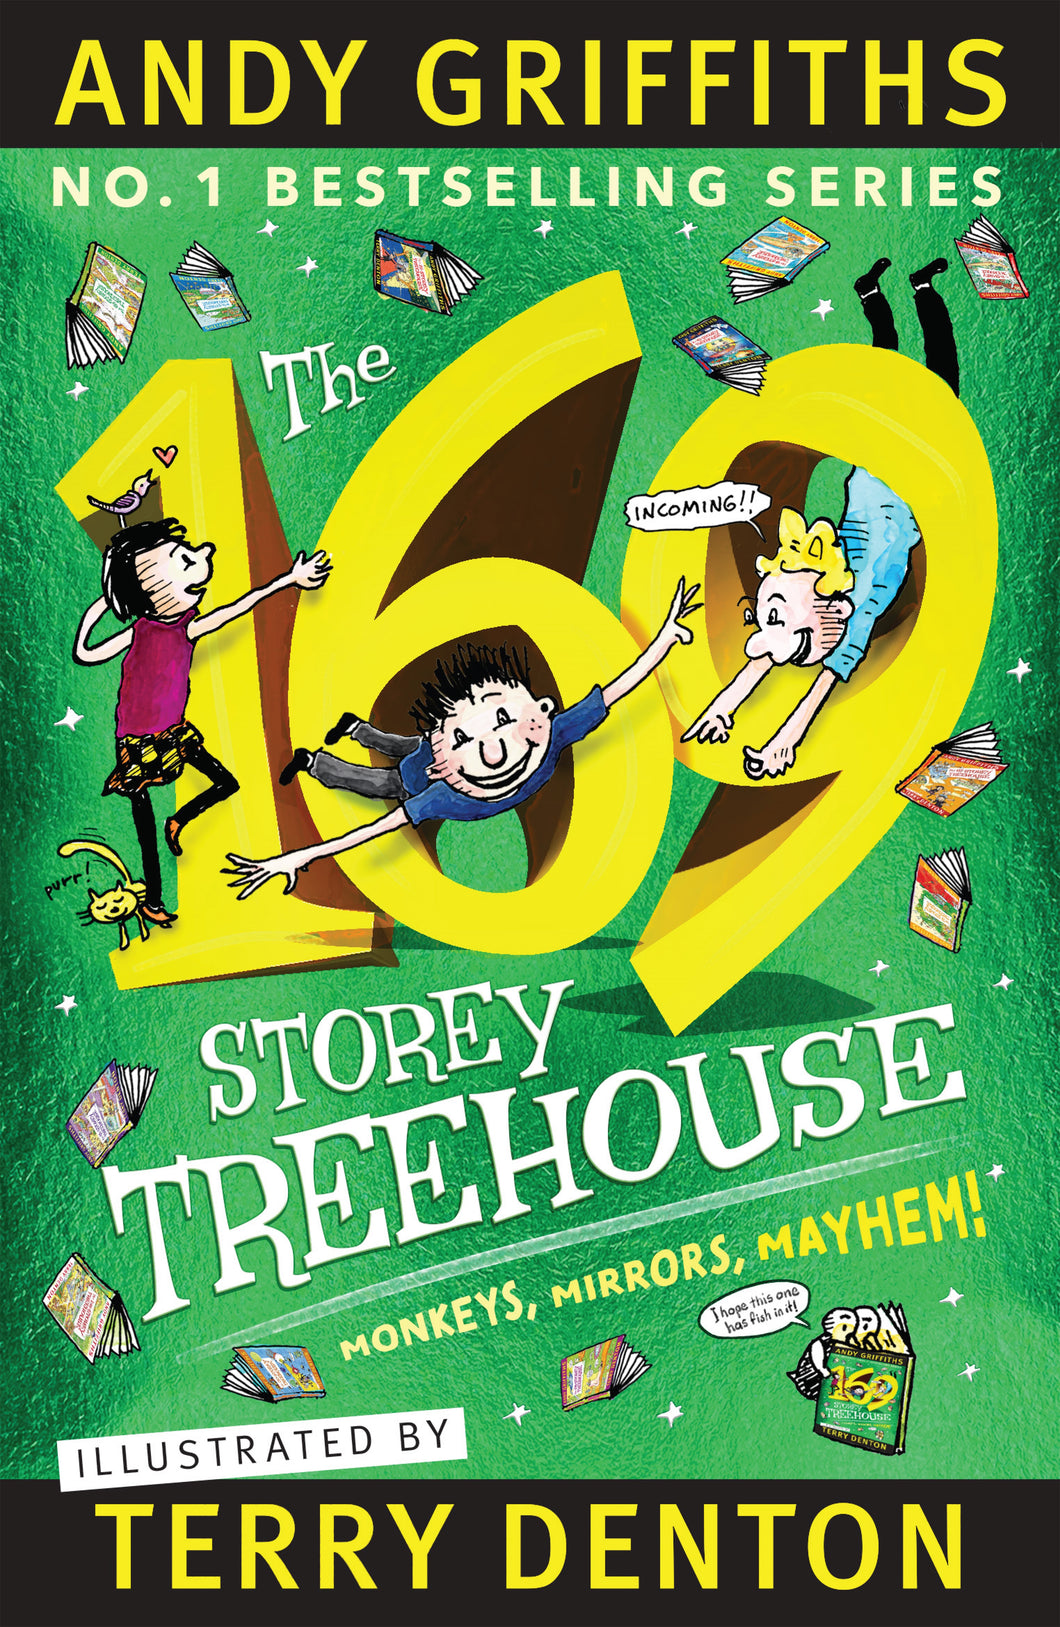 The 169-Storey Treehouse by Andy Griffiths and Terry Denton